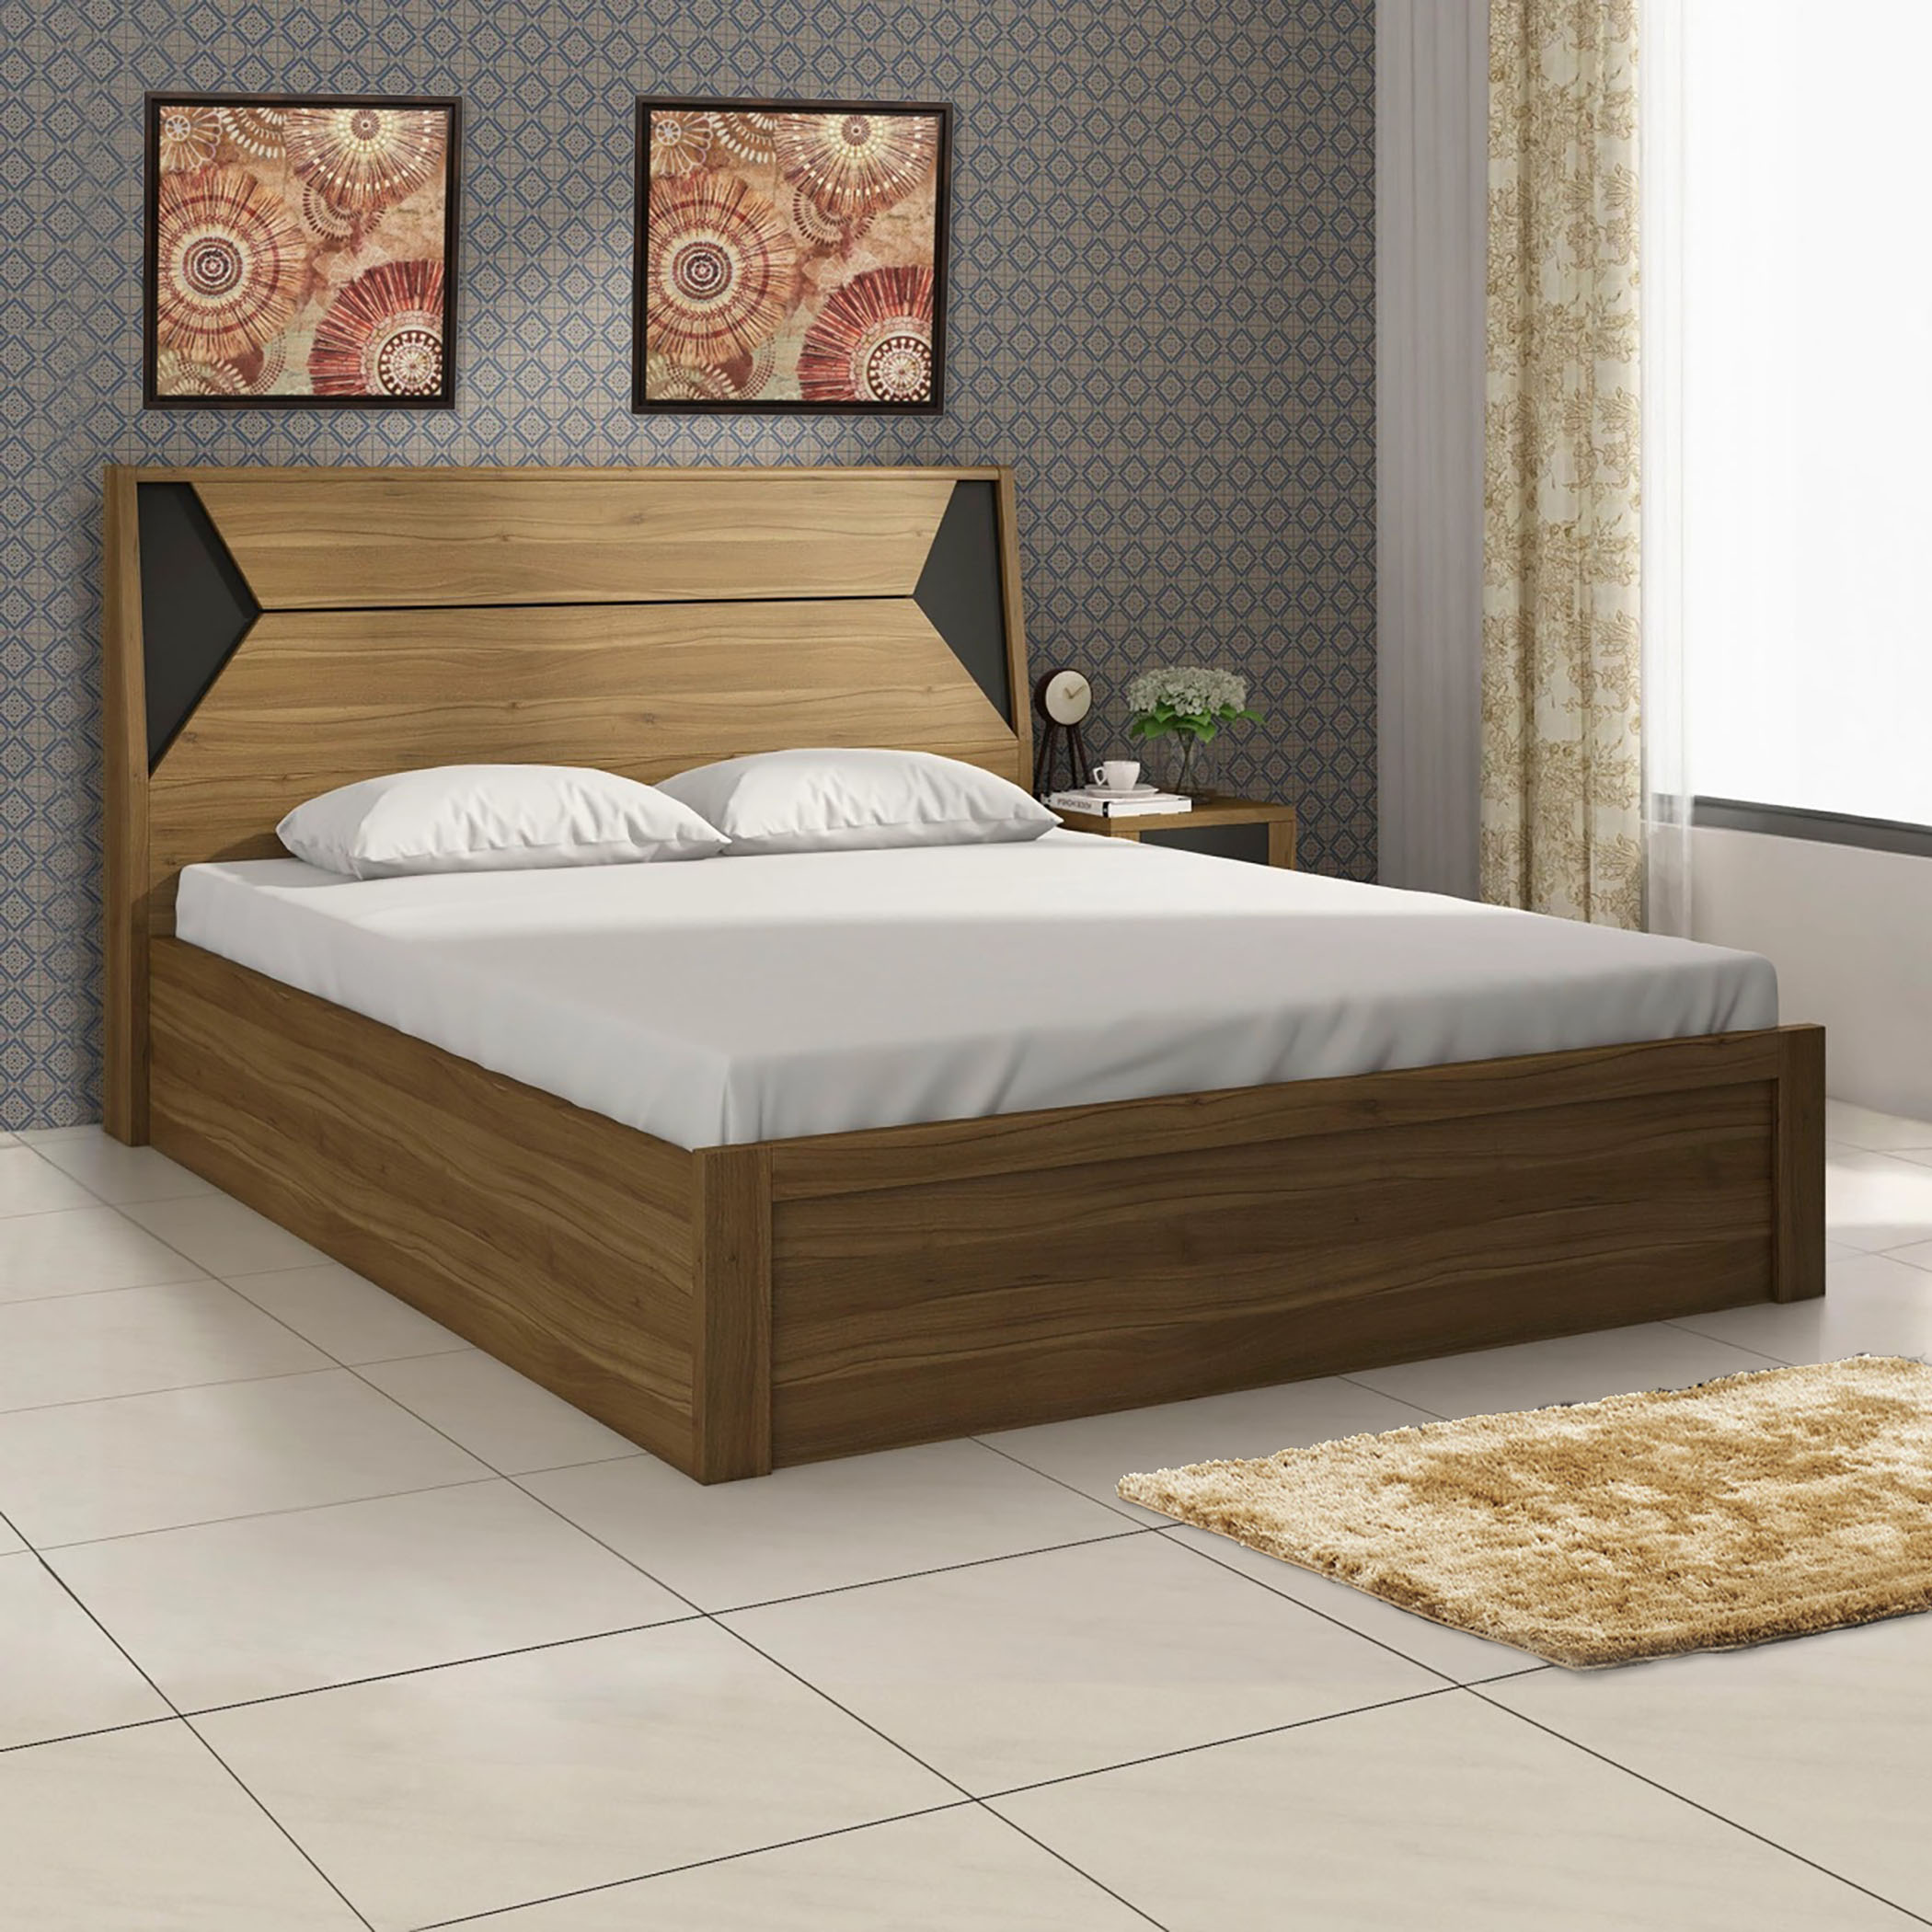 Quadro Edge Queen Bed with Box Storage - Brown